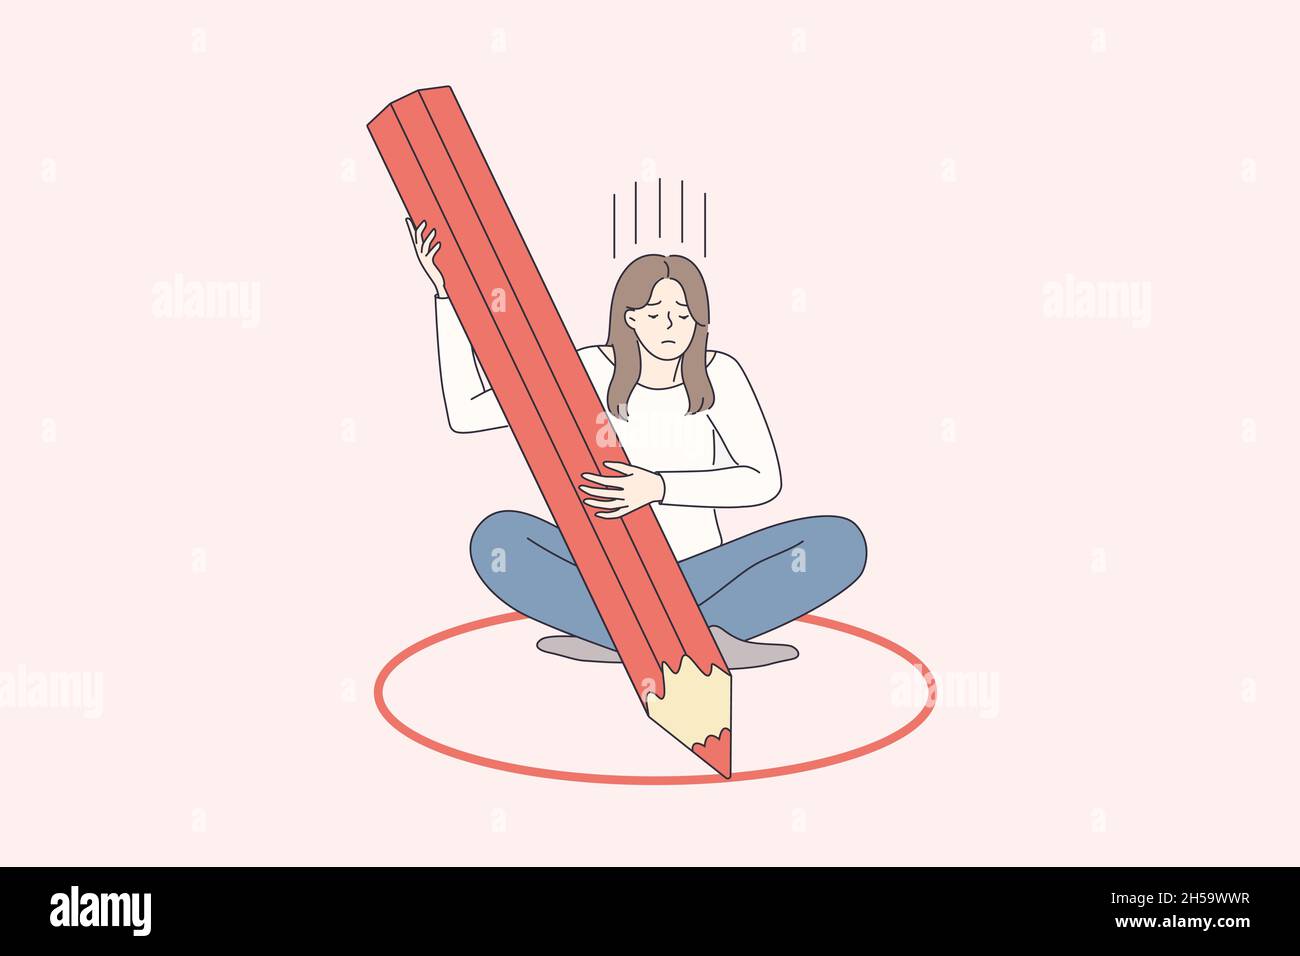 Personal boundaries and loneliness concept. Young frustrated woman cartoon character sitting in small red circle drawing with pencil feeling not free vector illustration  Stock Vector